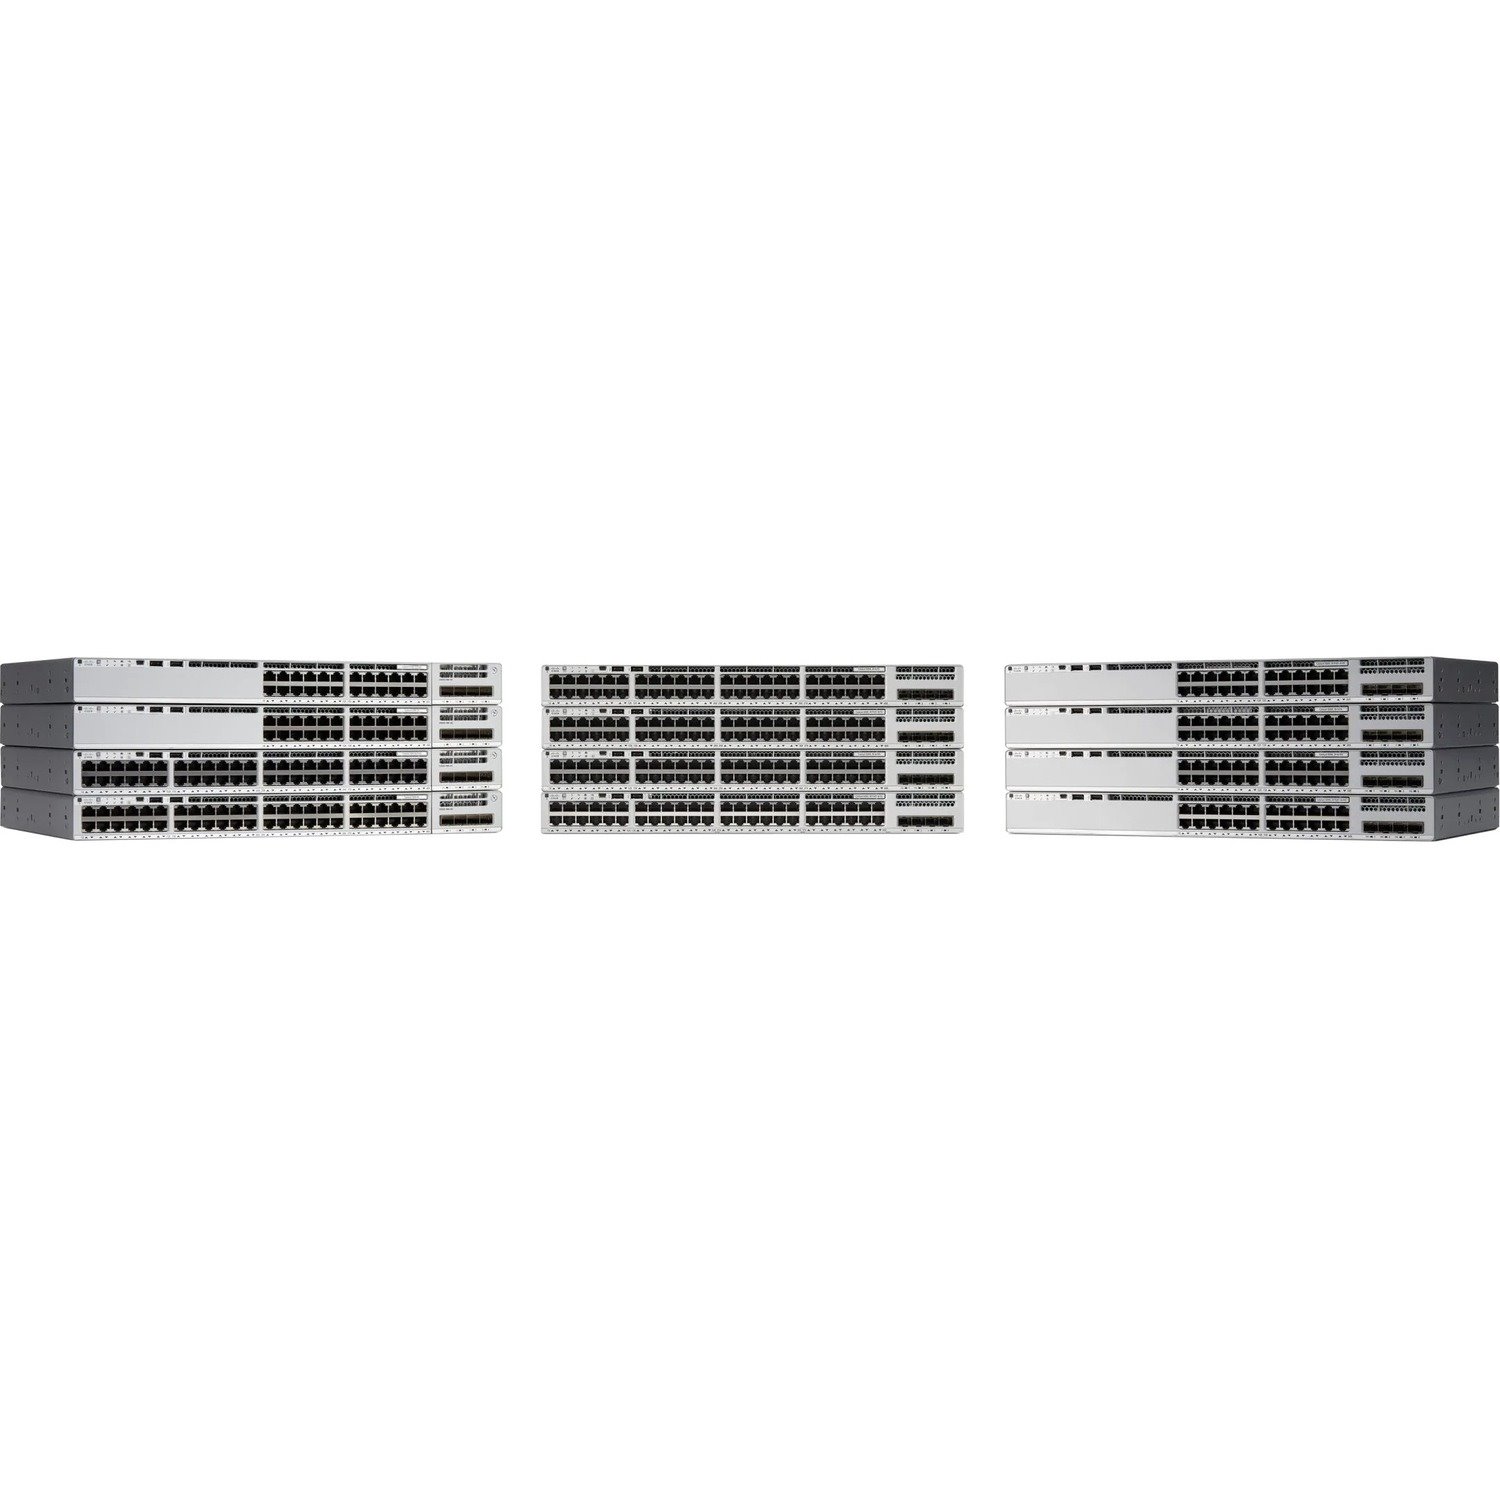 Cisco Catalyst 9200 8 Ports Manageable Ethernet Switch - Gigabit Ethernet, 10 Gigabit Ethernet - 1000Base-T, 10GBase-X